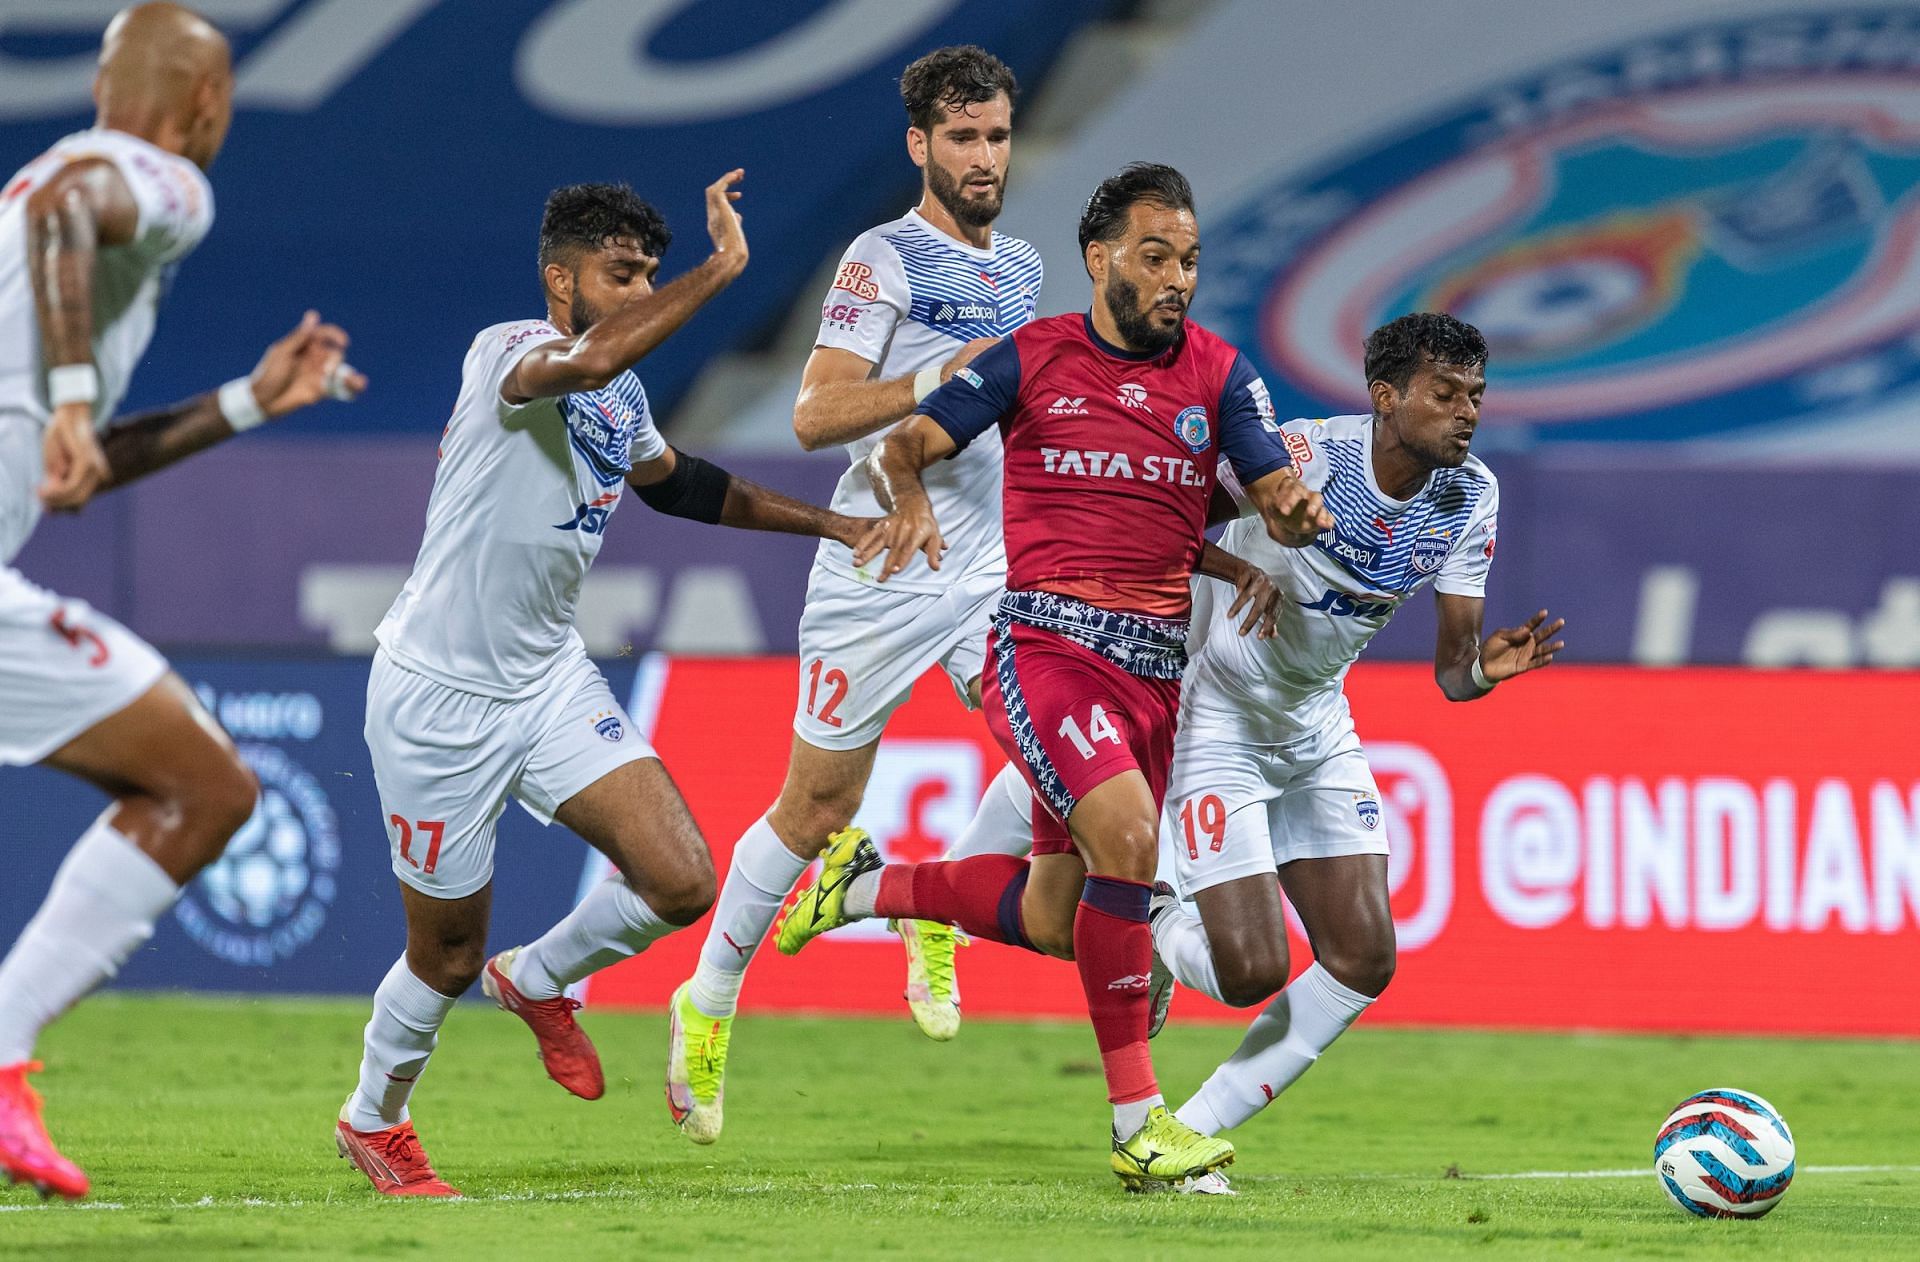 Jamshedpur FC and Bengaluru FC players in action. [Credits: ISL]